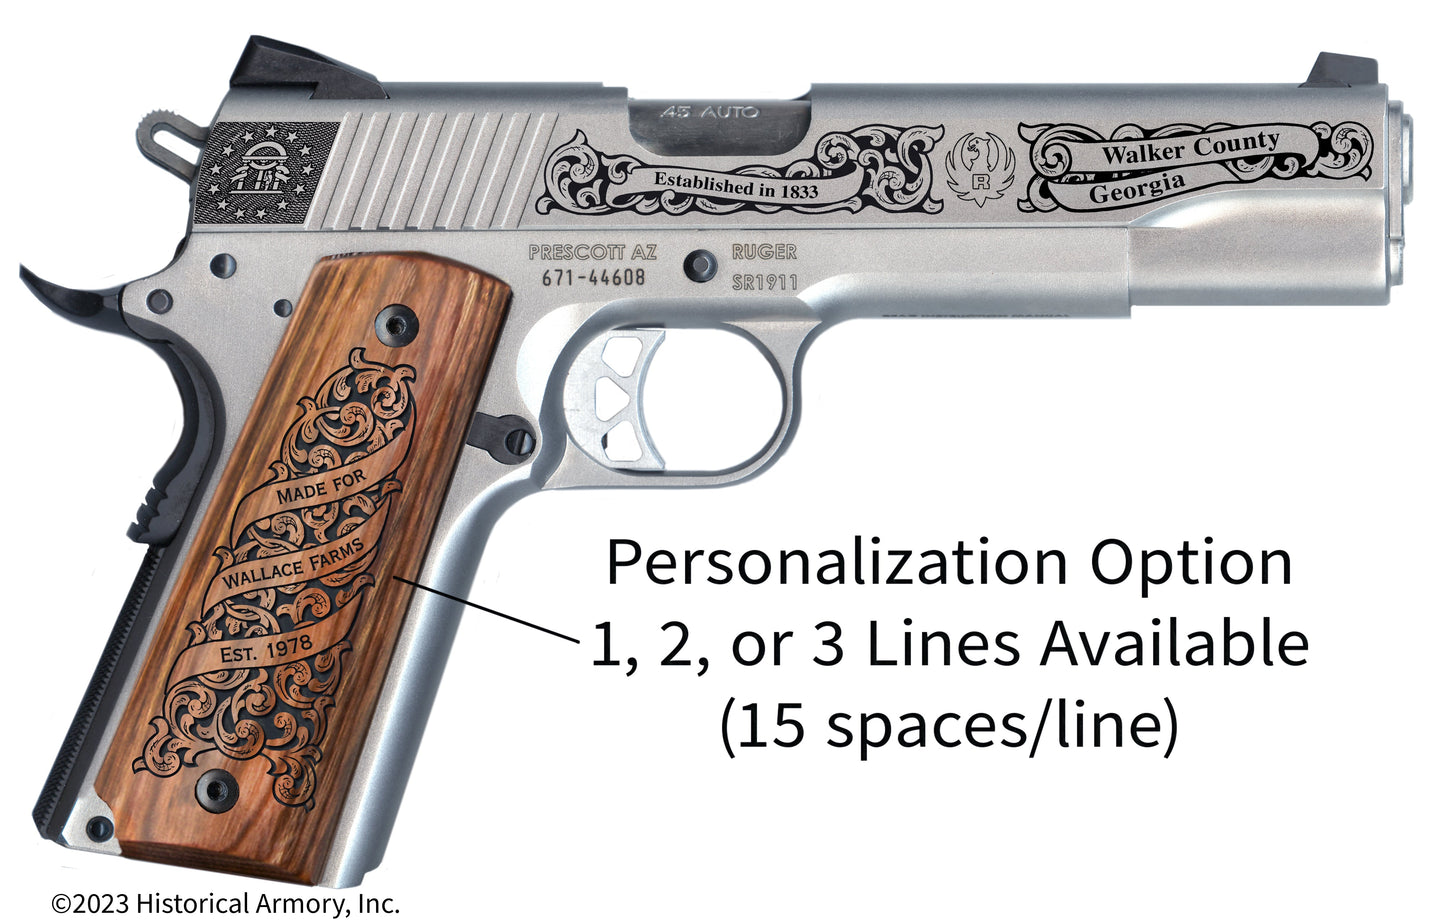 Walker County Georgia Personalized Engraved .45 Auto Ruger 1911